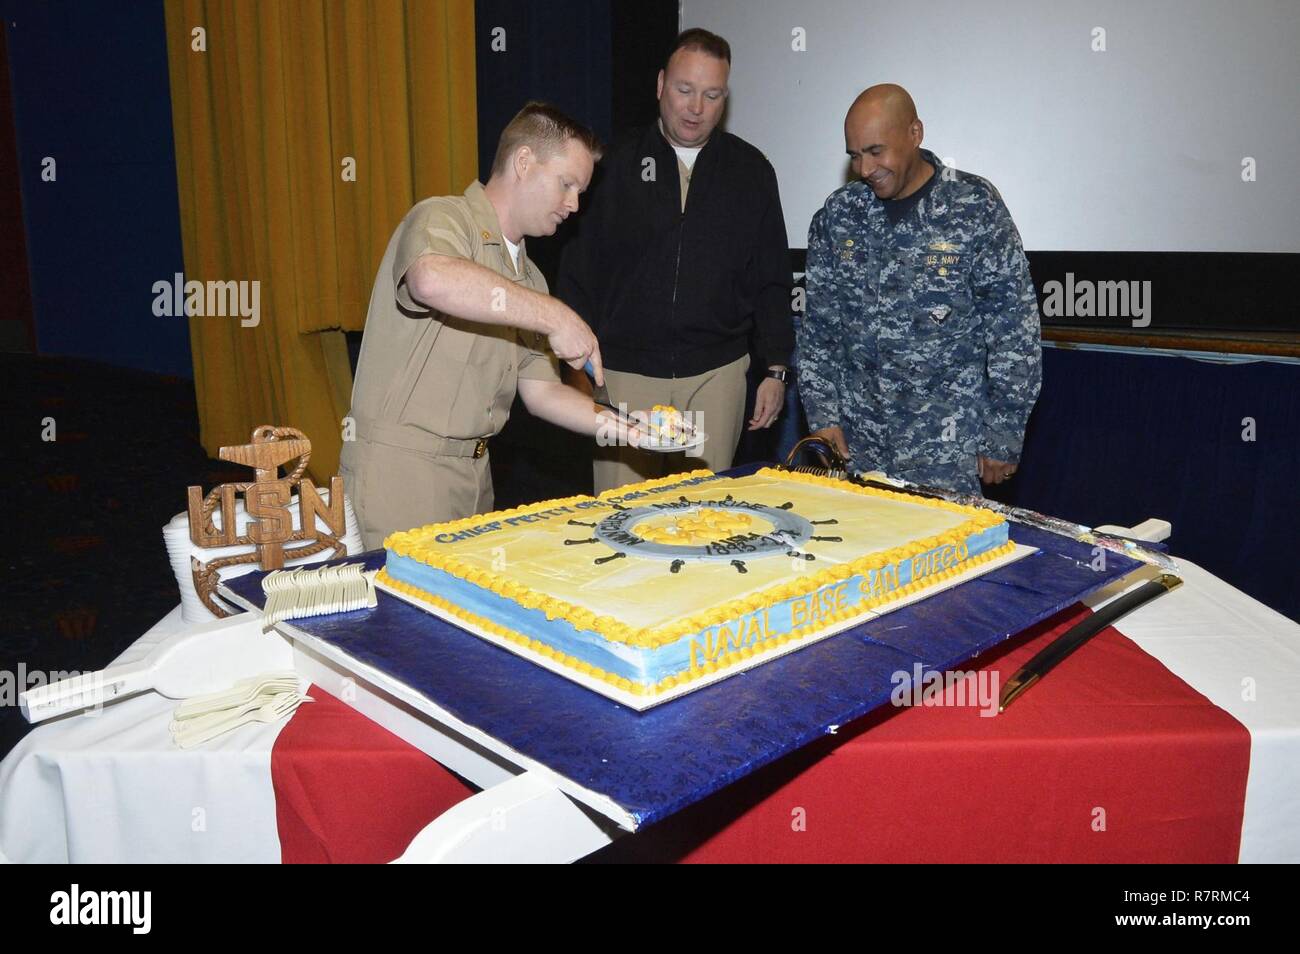 SAN DIEGO (April 3, 2017)  The youngest Chief Petty Officer from Naval Base San Diego Chief Quartermaster Colin Lalor serves a slice of cake to Commanding Officer Capt. Roy Love, right, and Command Master Chief Matt Ruane in celebration of the 124th birthday of the chief petty officer rank at the base theater. Stock Photo